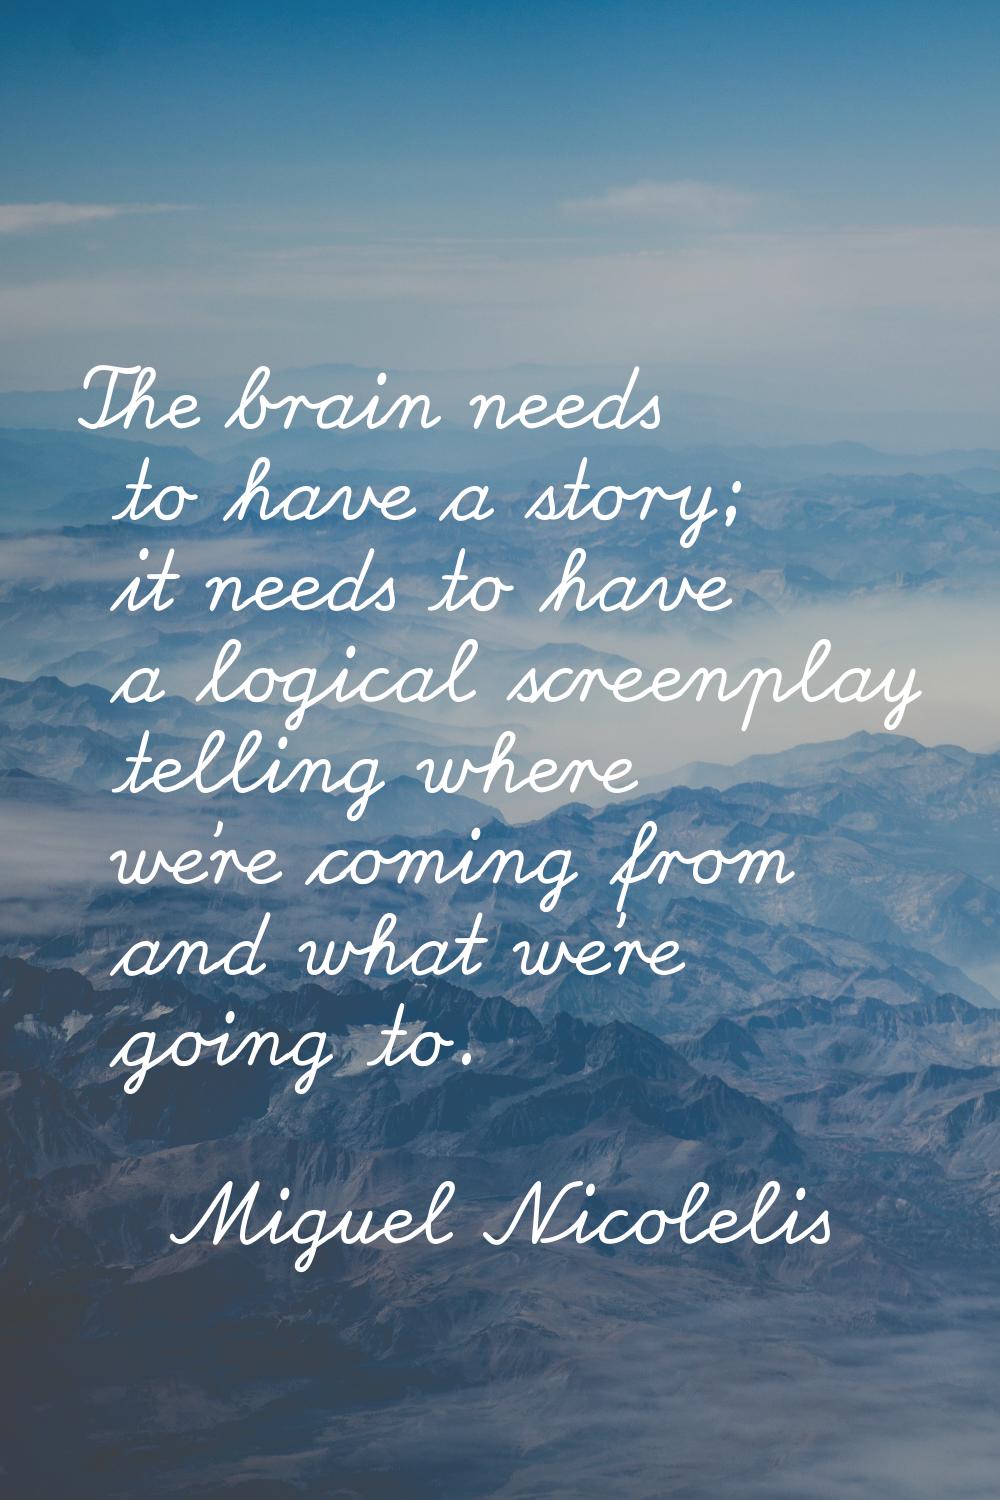 The brain needs to have a story; it needs to have a logical screenplay telling where we're coming f